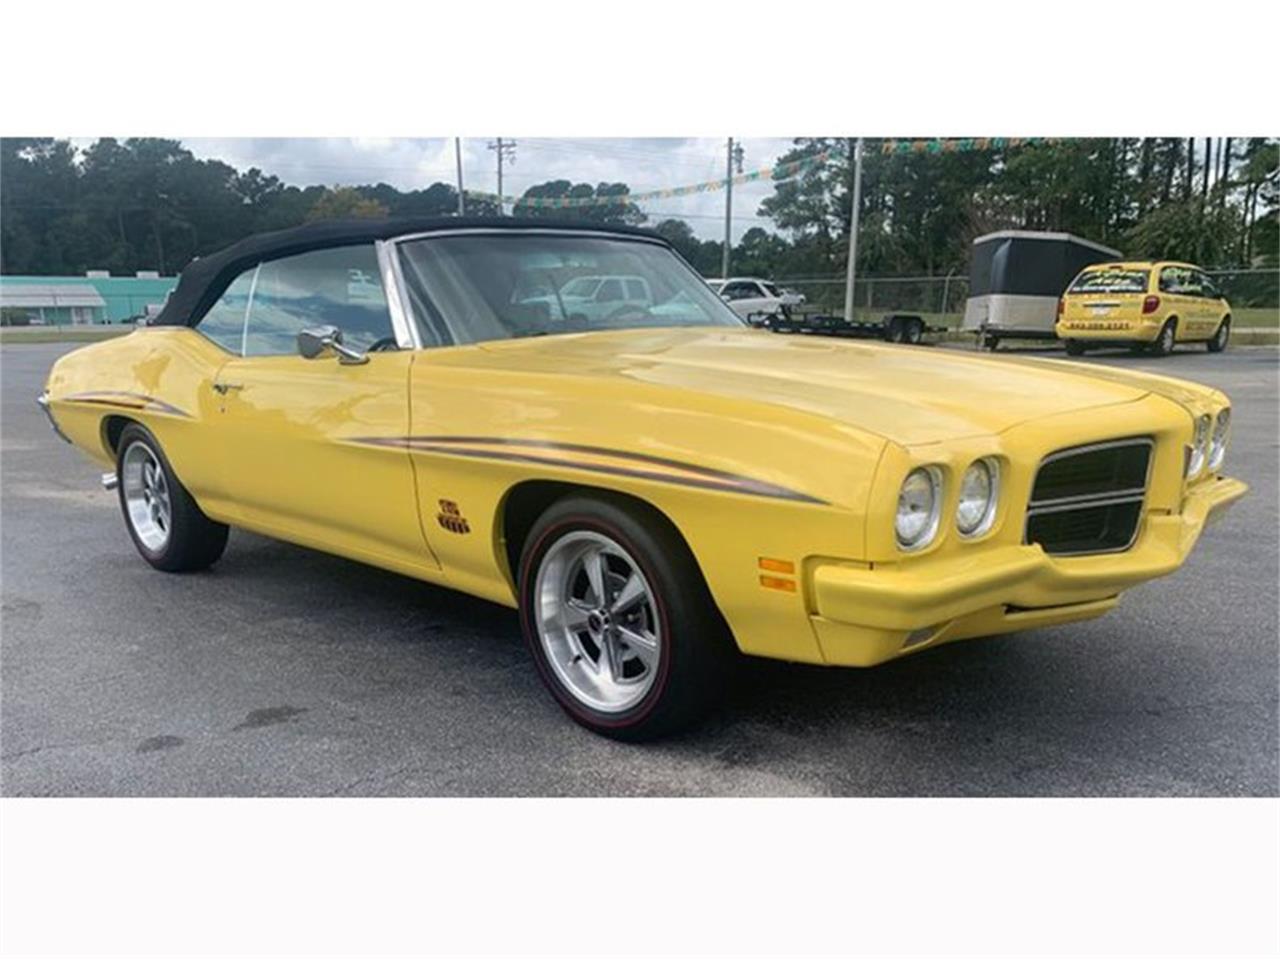 For Sale at Auction: 1972 Pontiac LeMans in Greensboro, North Carolina for sale in Greensboro, NC